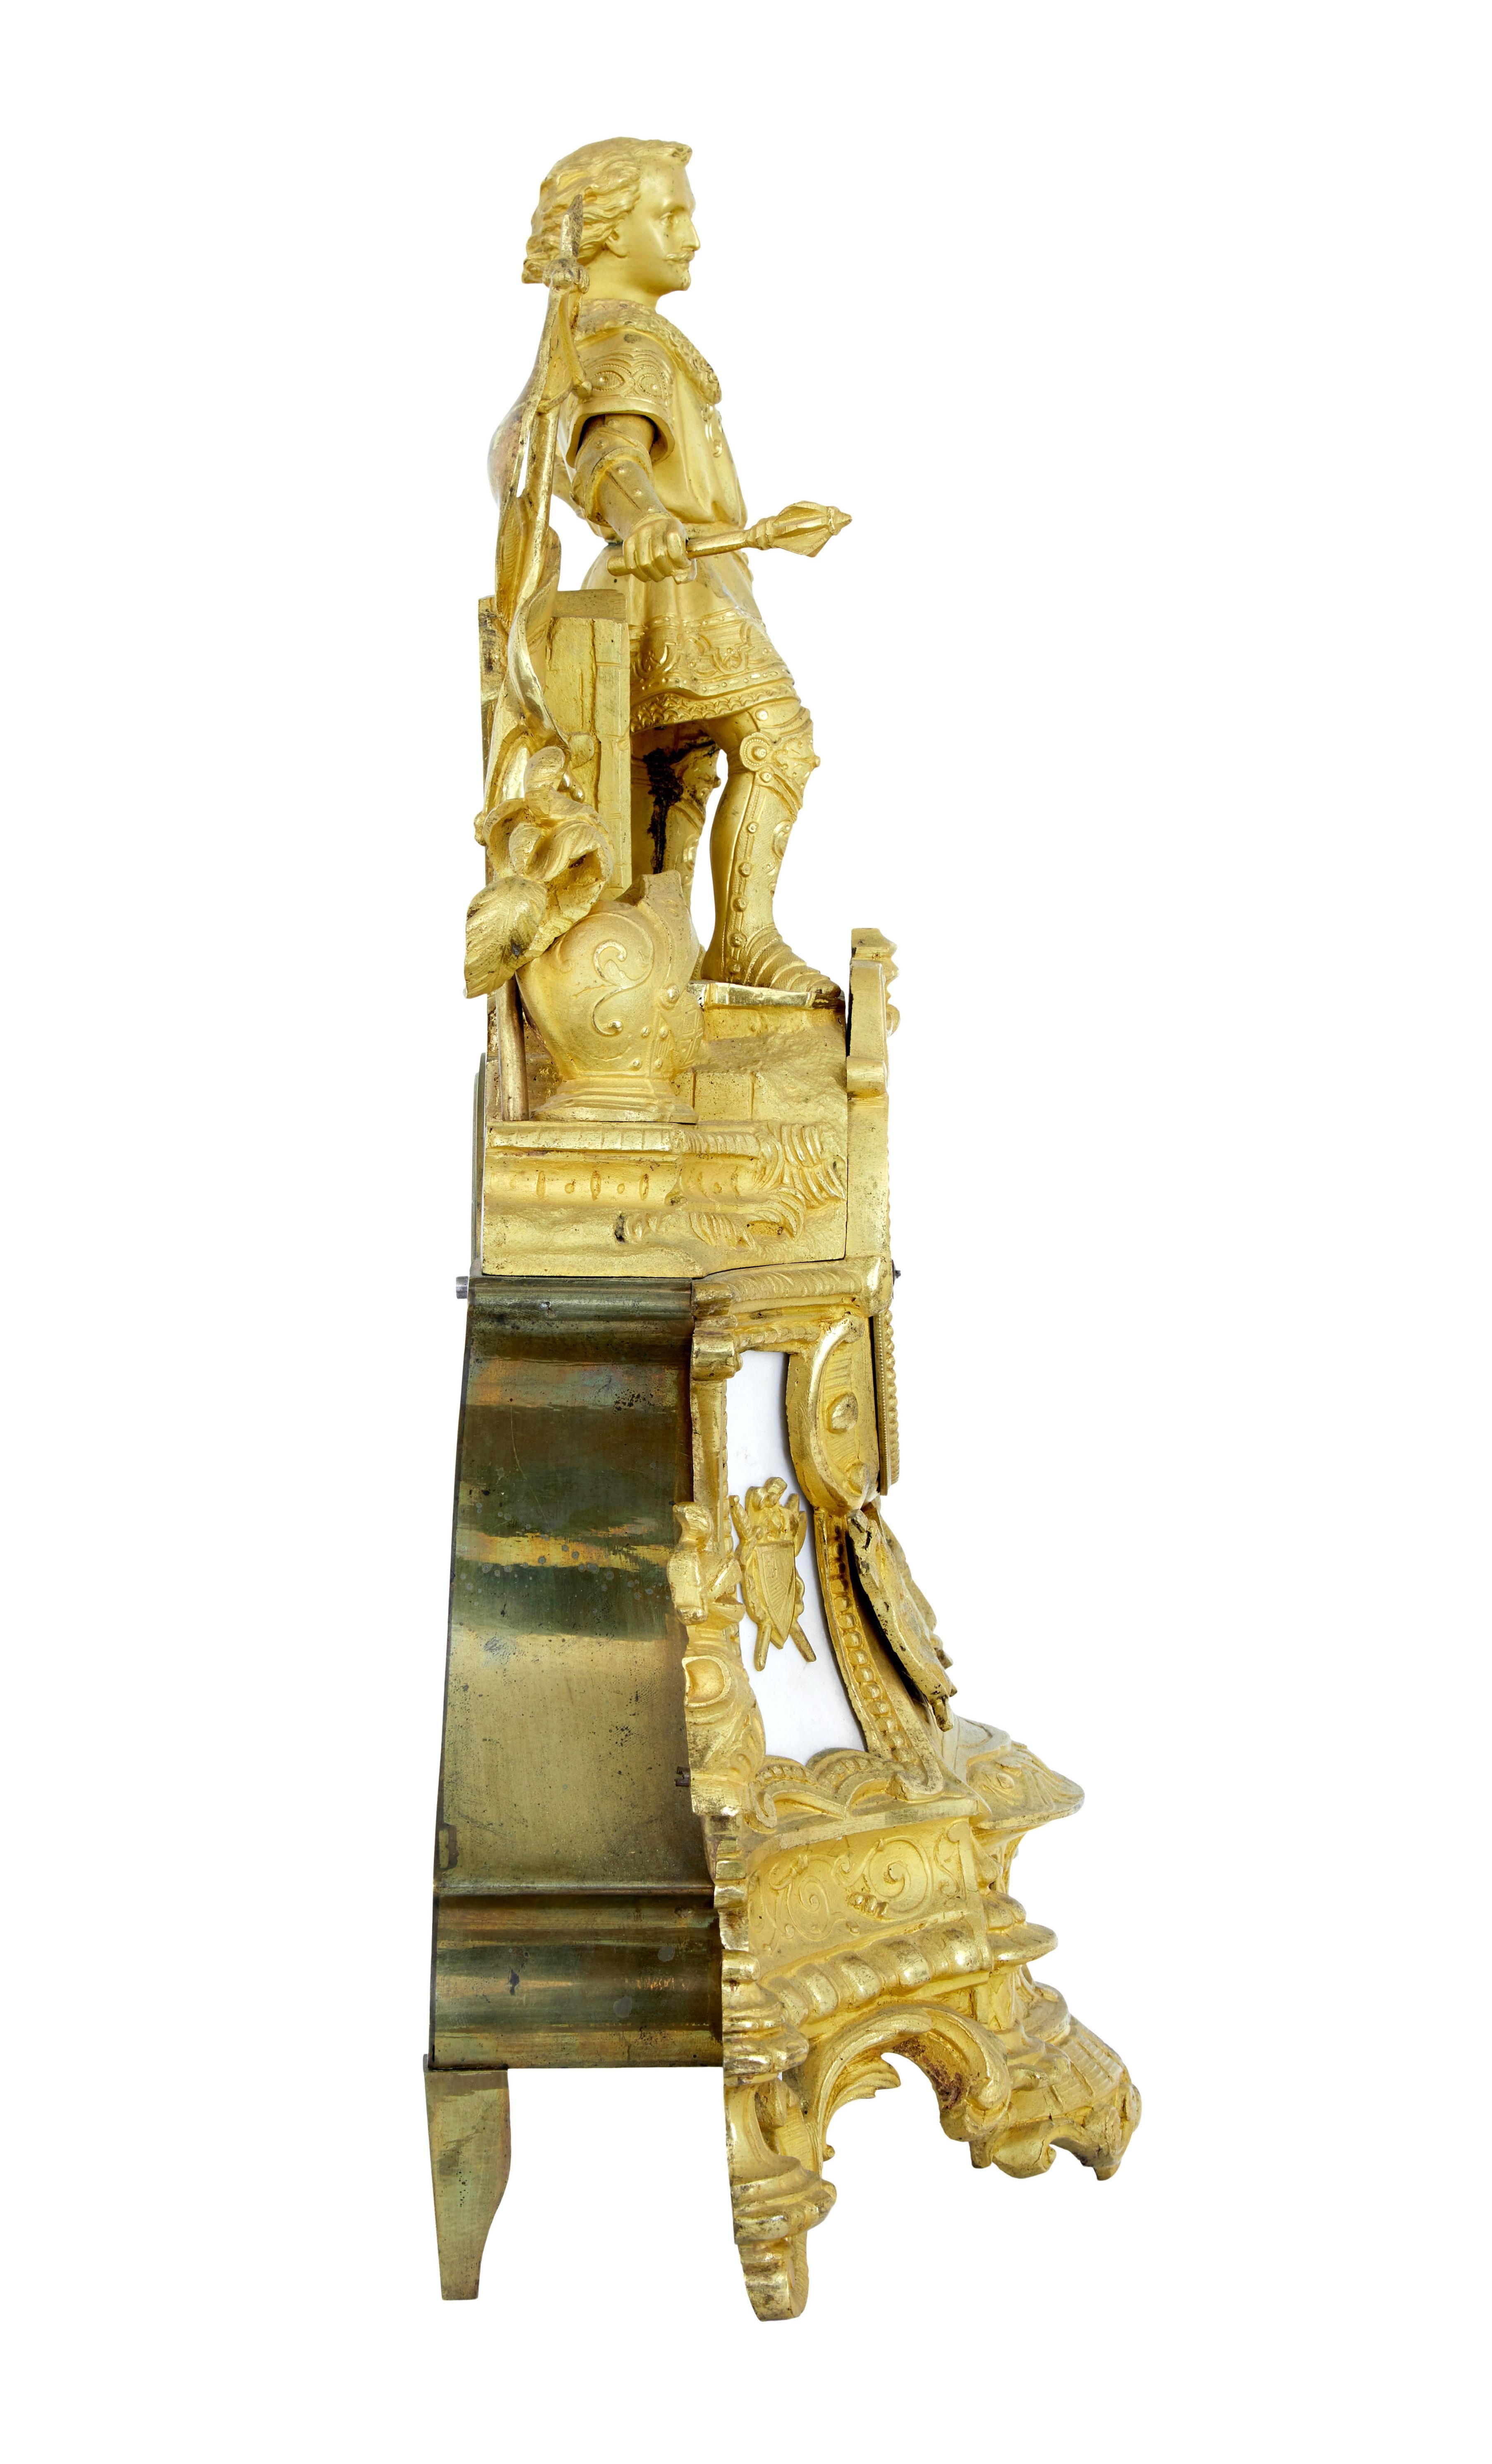 Rococo Revival 19th century French ormolu and marble figural mantel clock For Sale